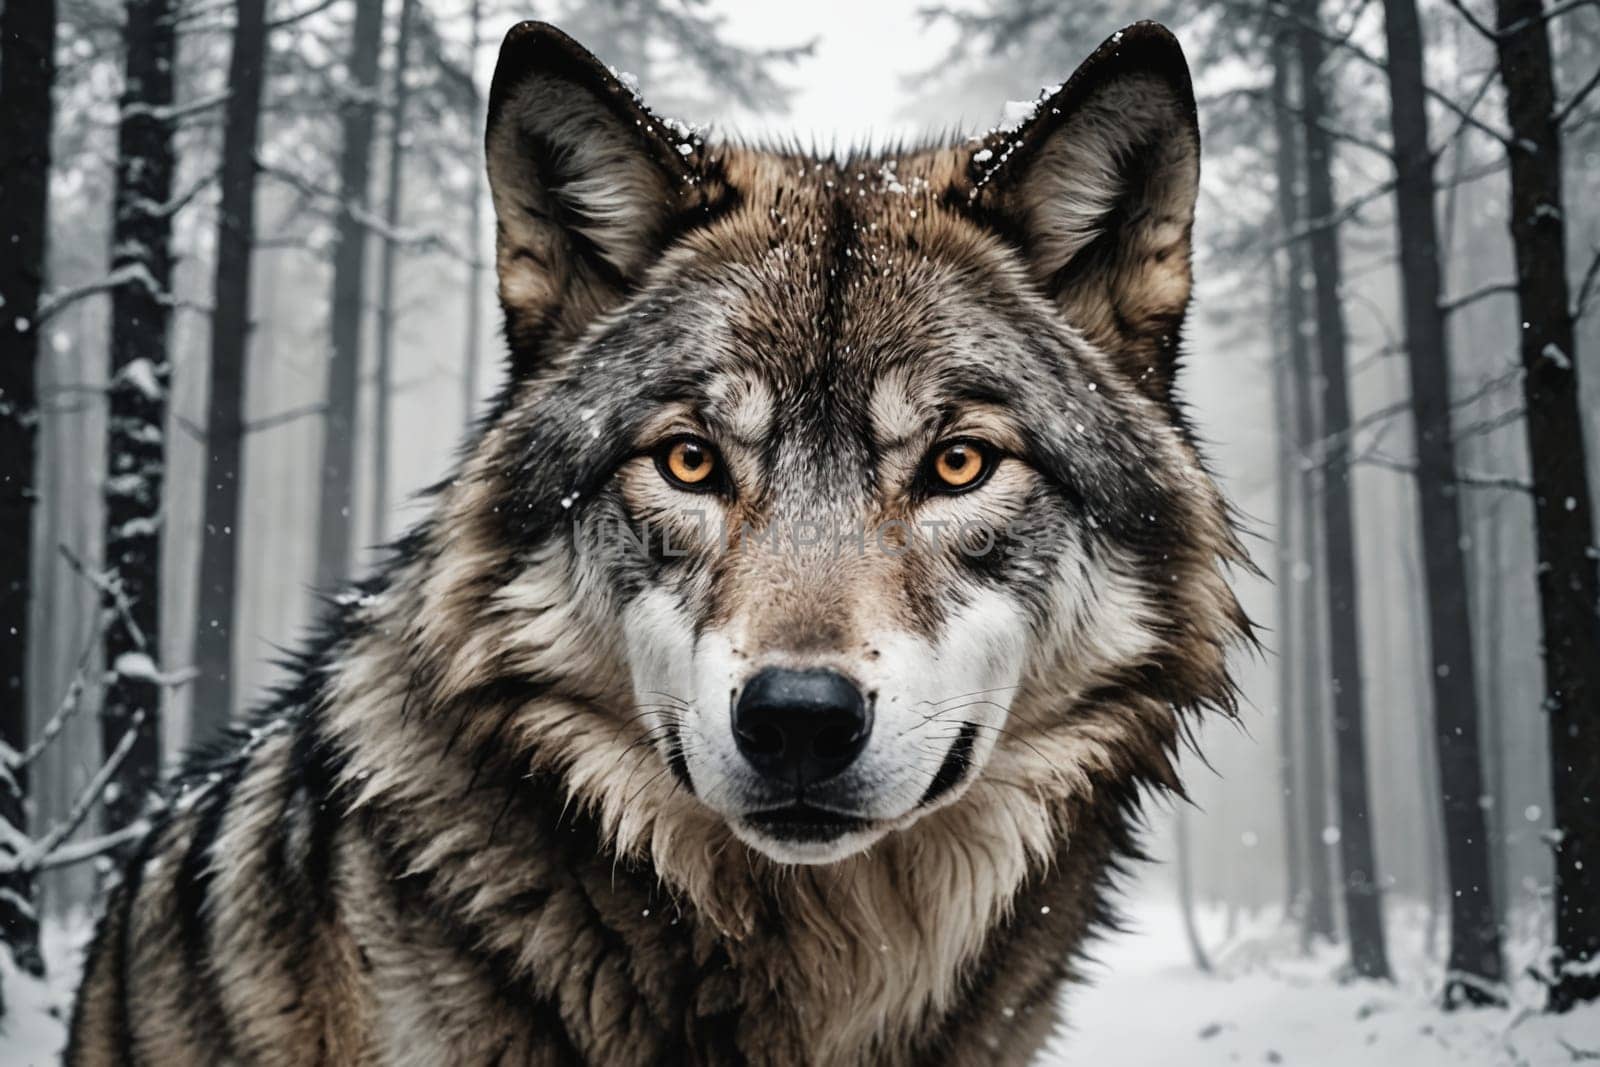 In the quiet of the snow-covered woods, a lone wolf's gaze conveys the essence of winter's beauty.